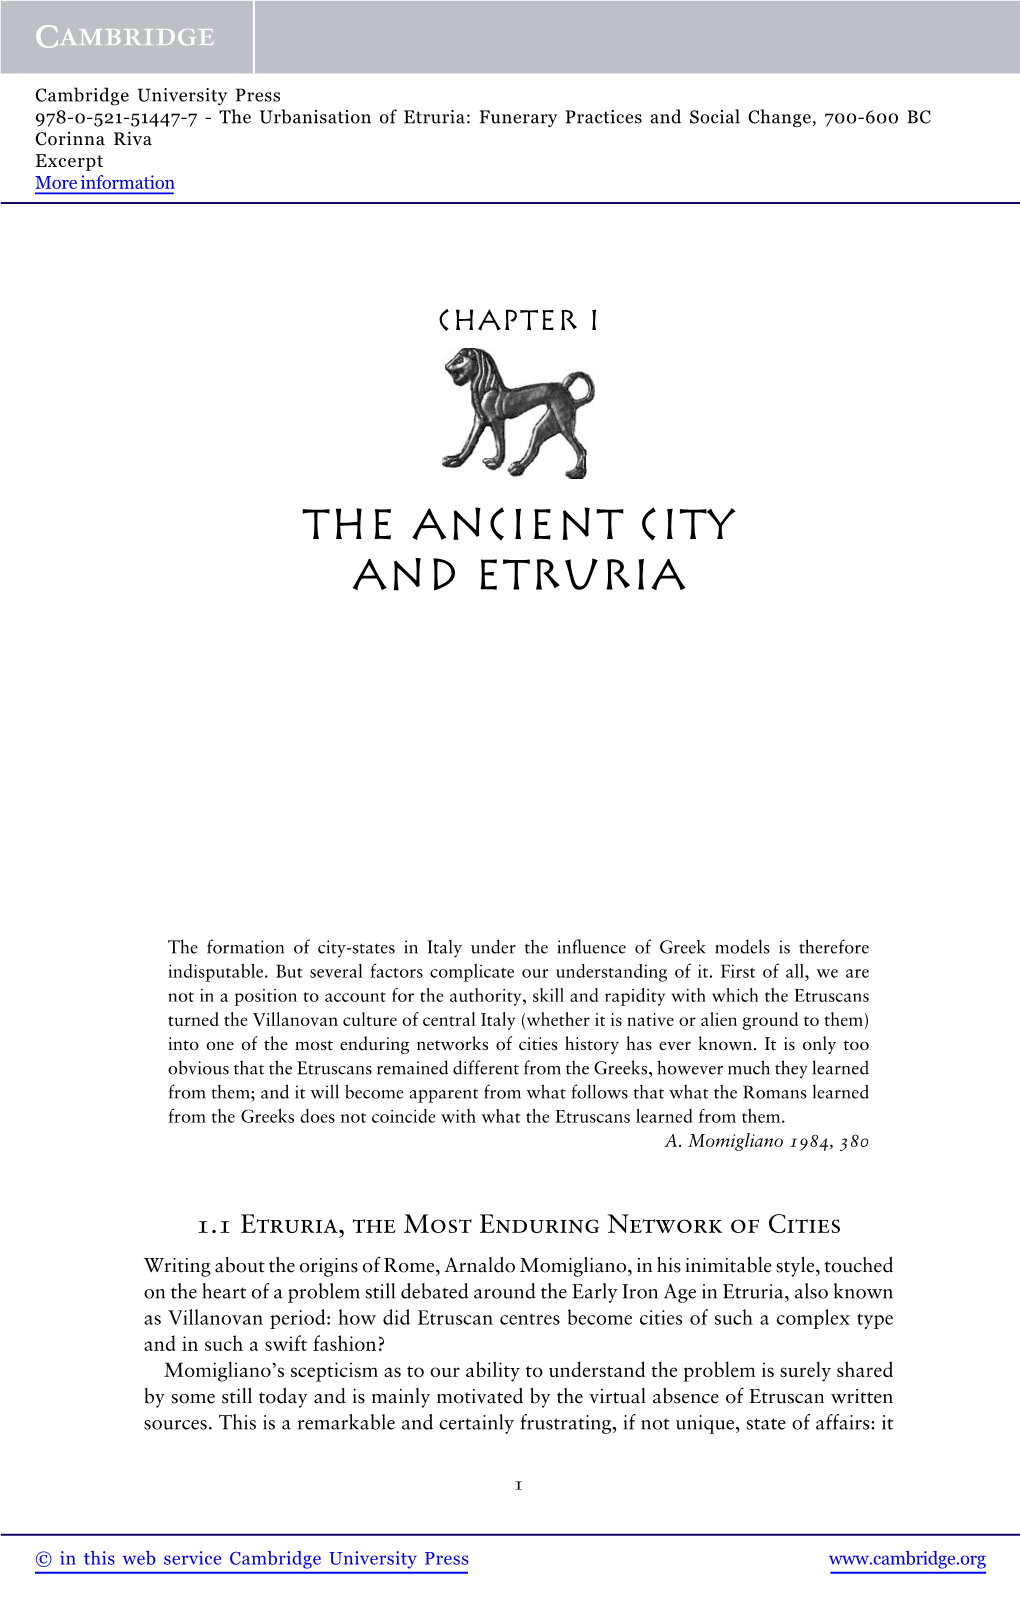 The Ancient City and Etruria